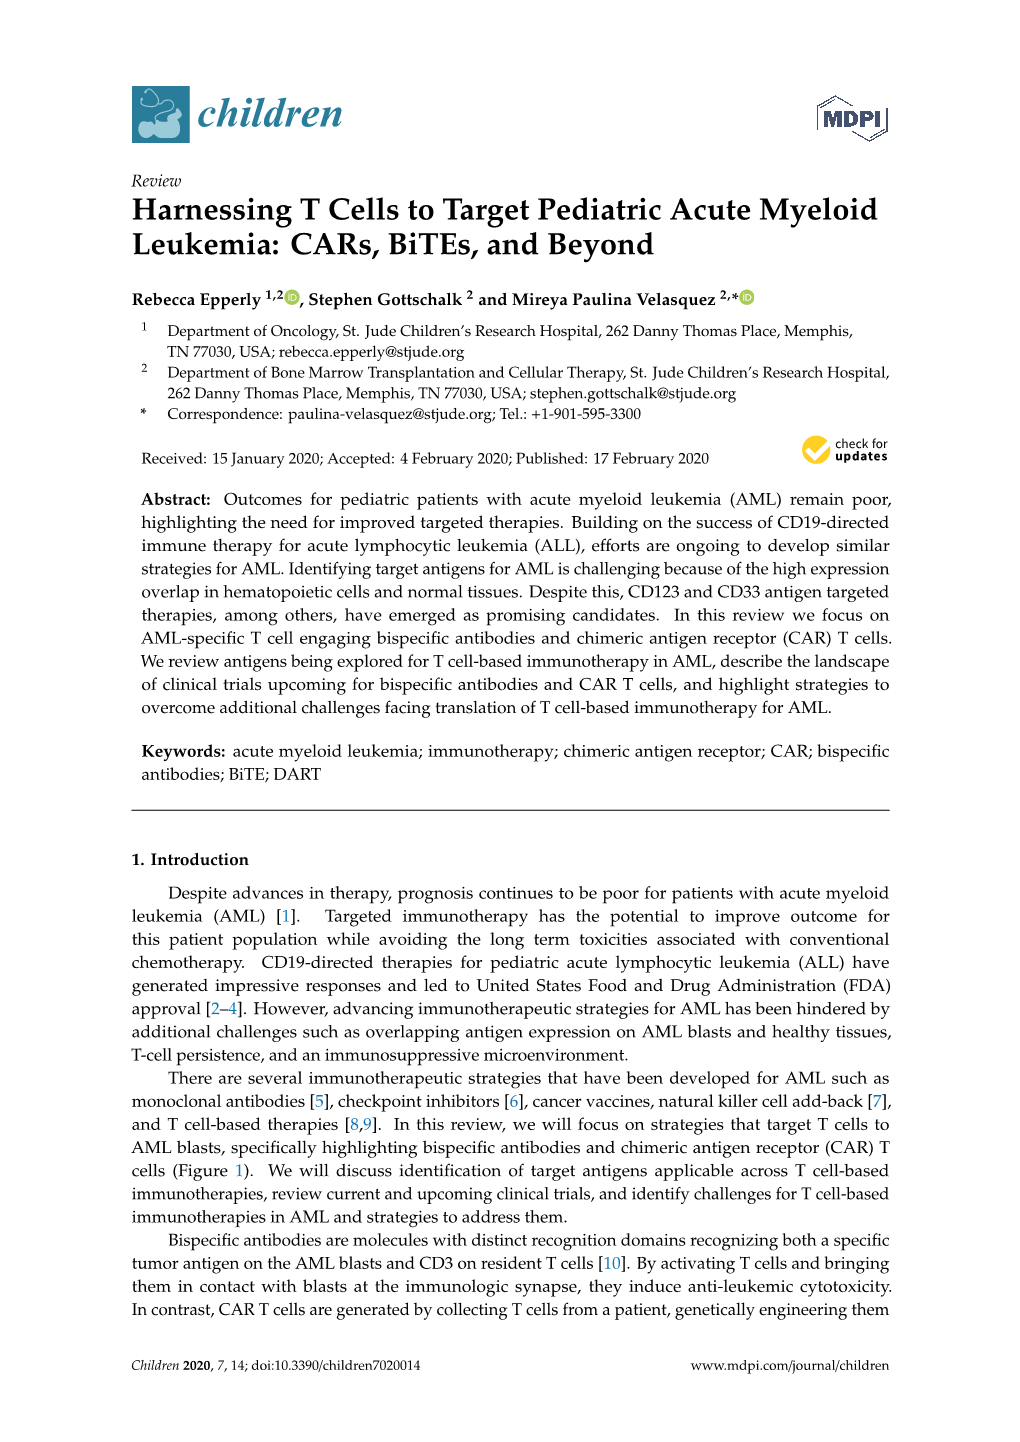 Harnessing T Cells to Target Pediatric Acute Myeloid Leukemia: Cars, Bites, and Beyond